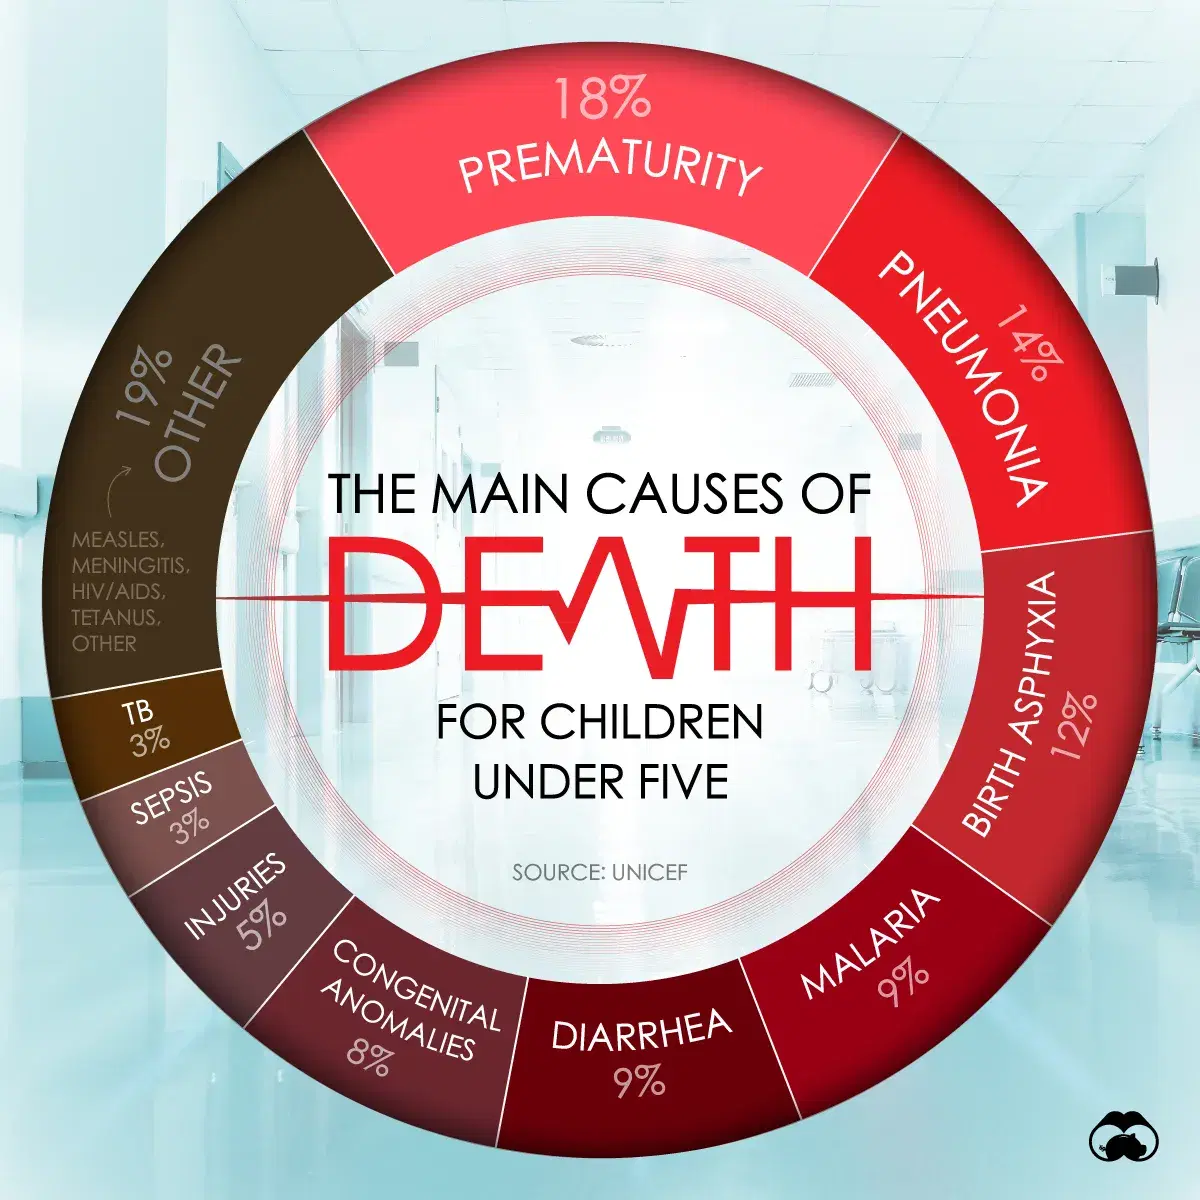 Prematurity & Pneumonia Are the Main Causes of Child Deaths